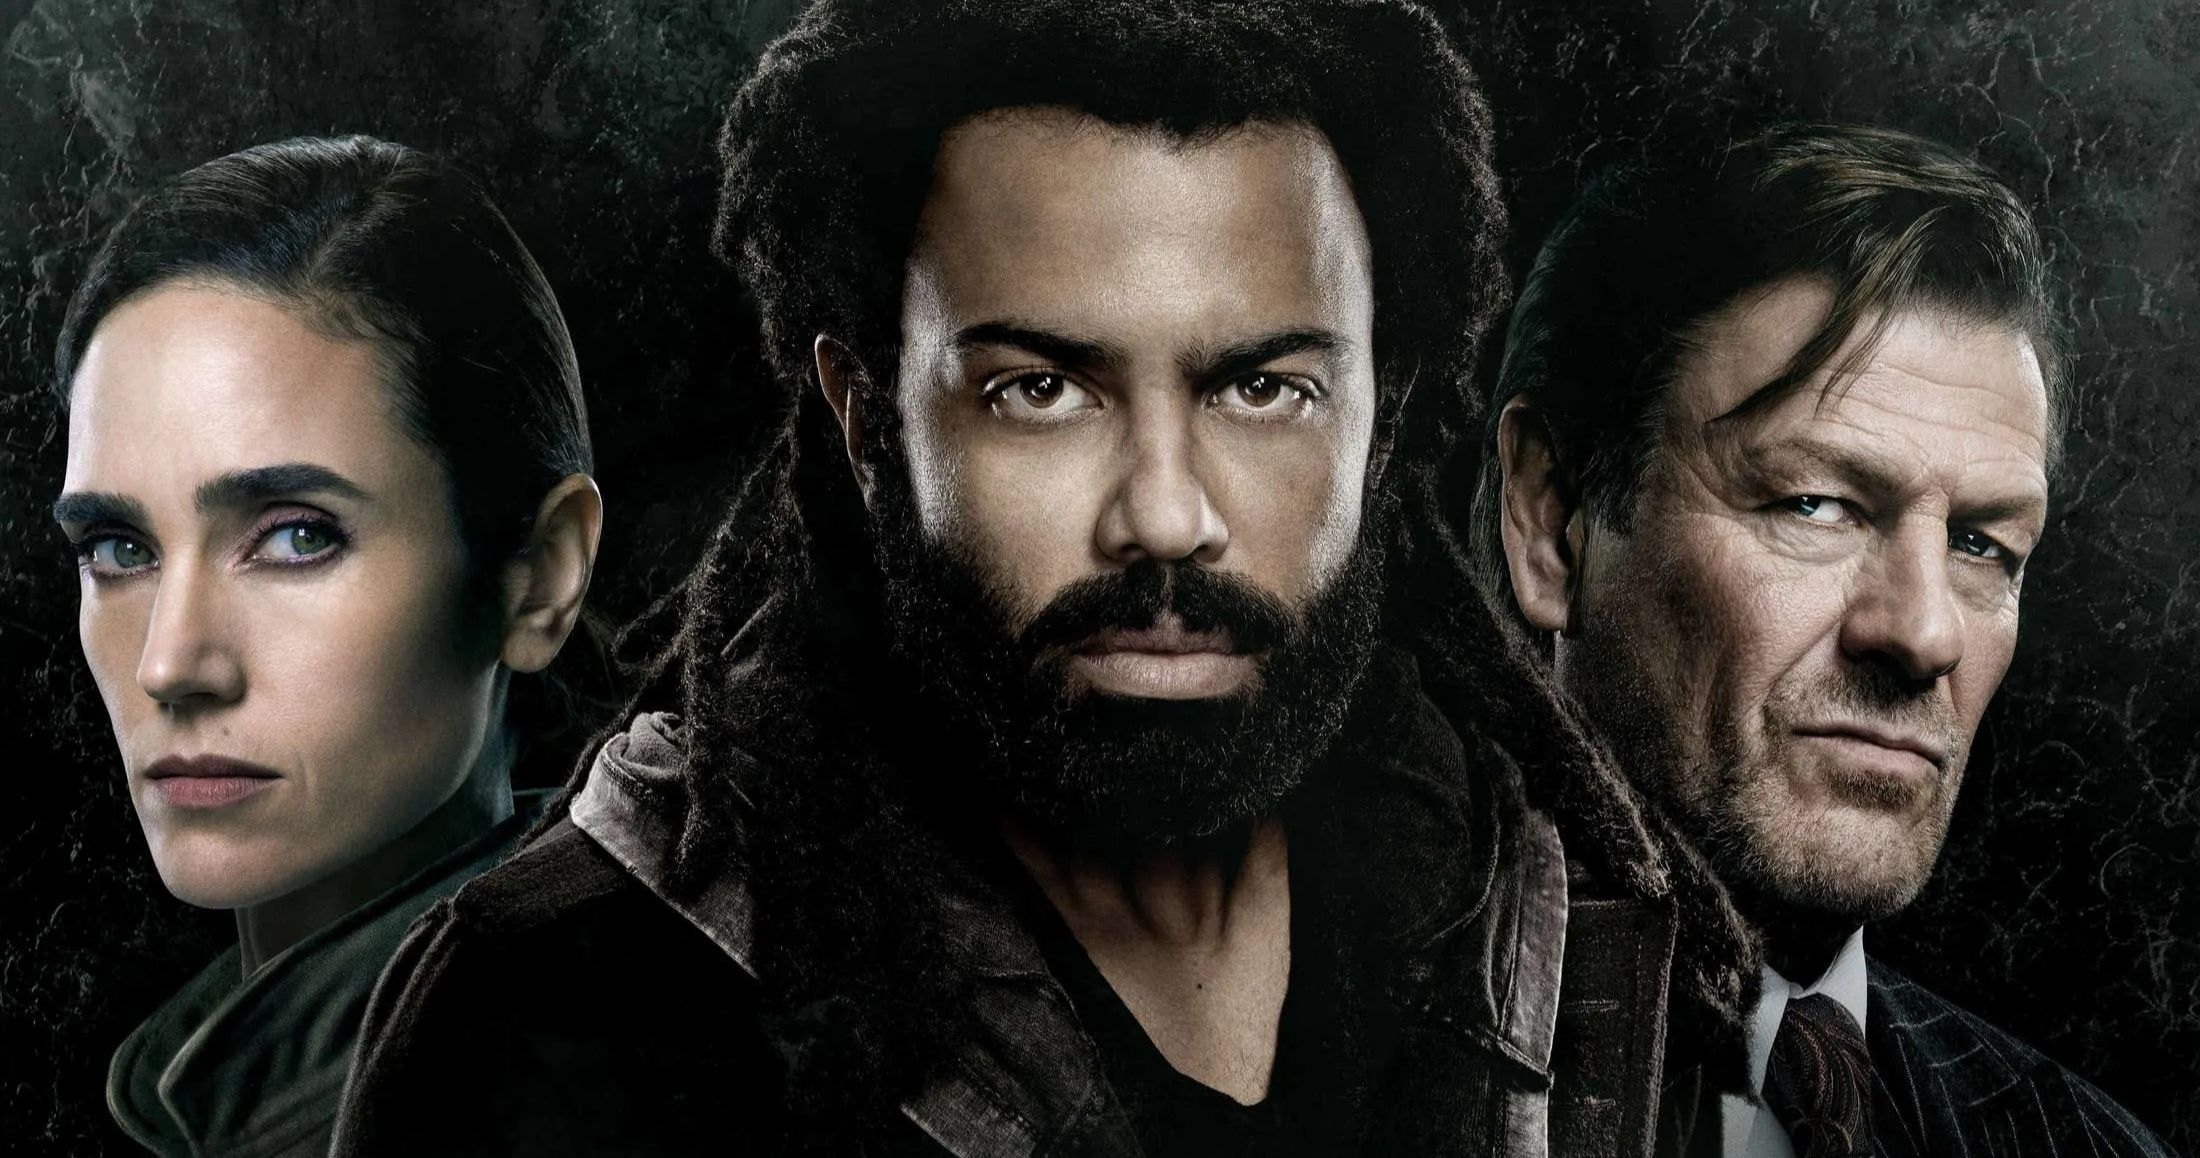 Snowpiercer Sets a Date for Its Epic Two-Hour Season 2 Finale